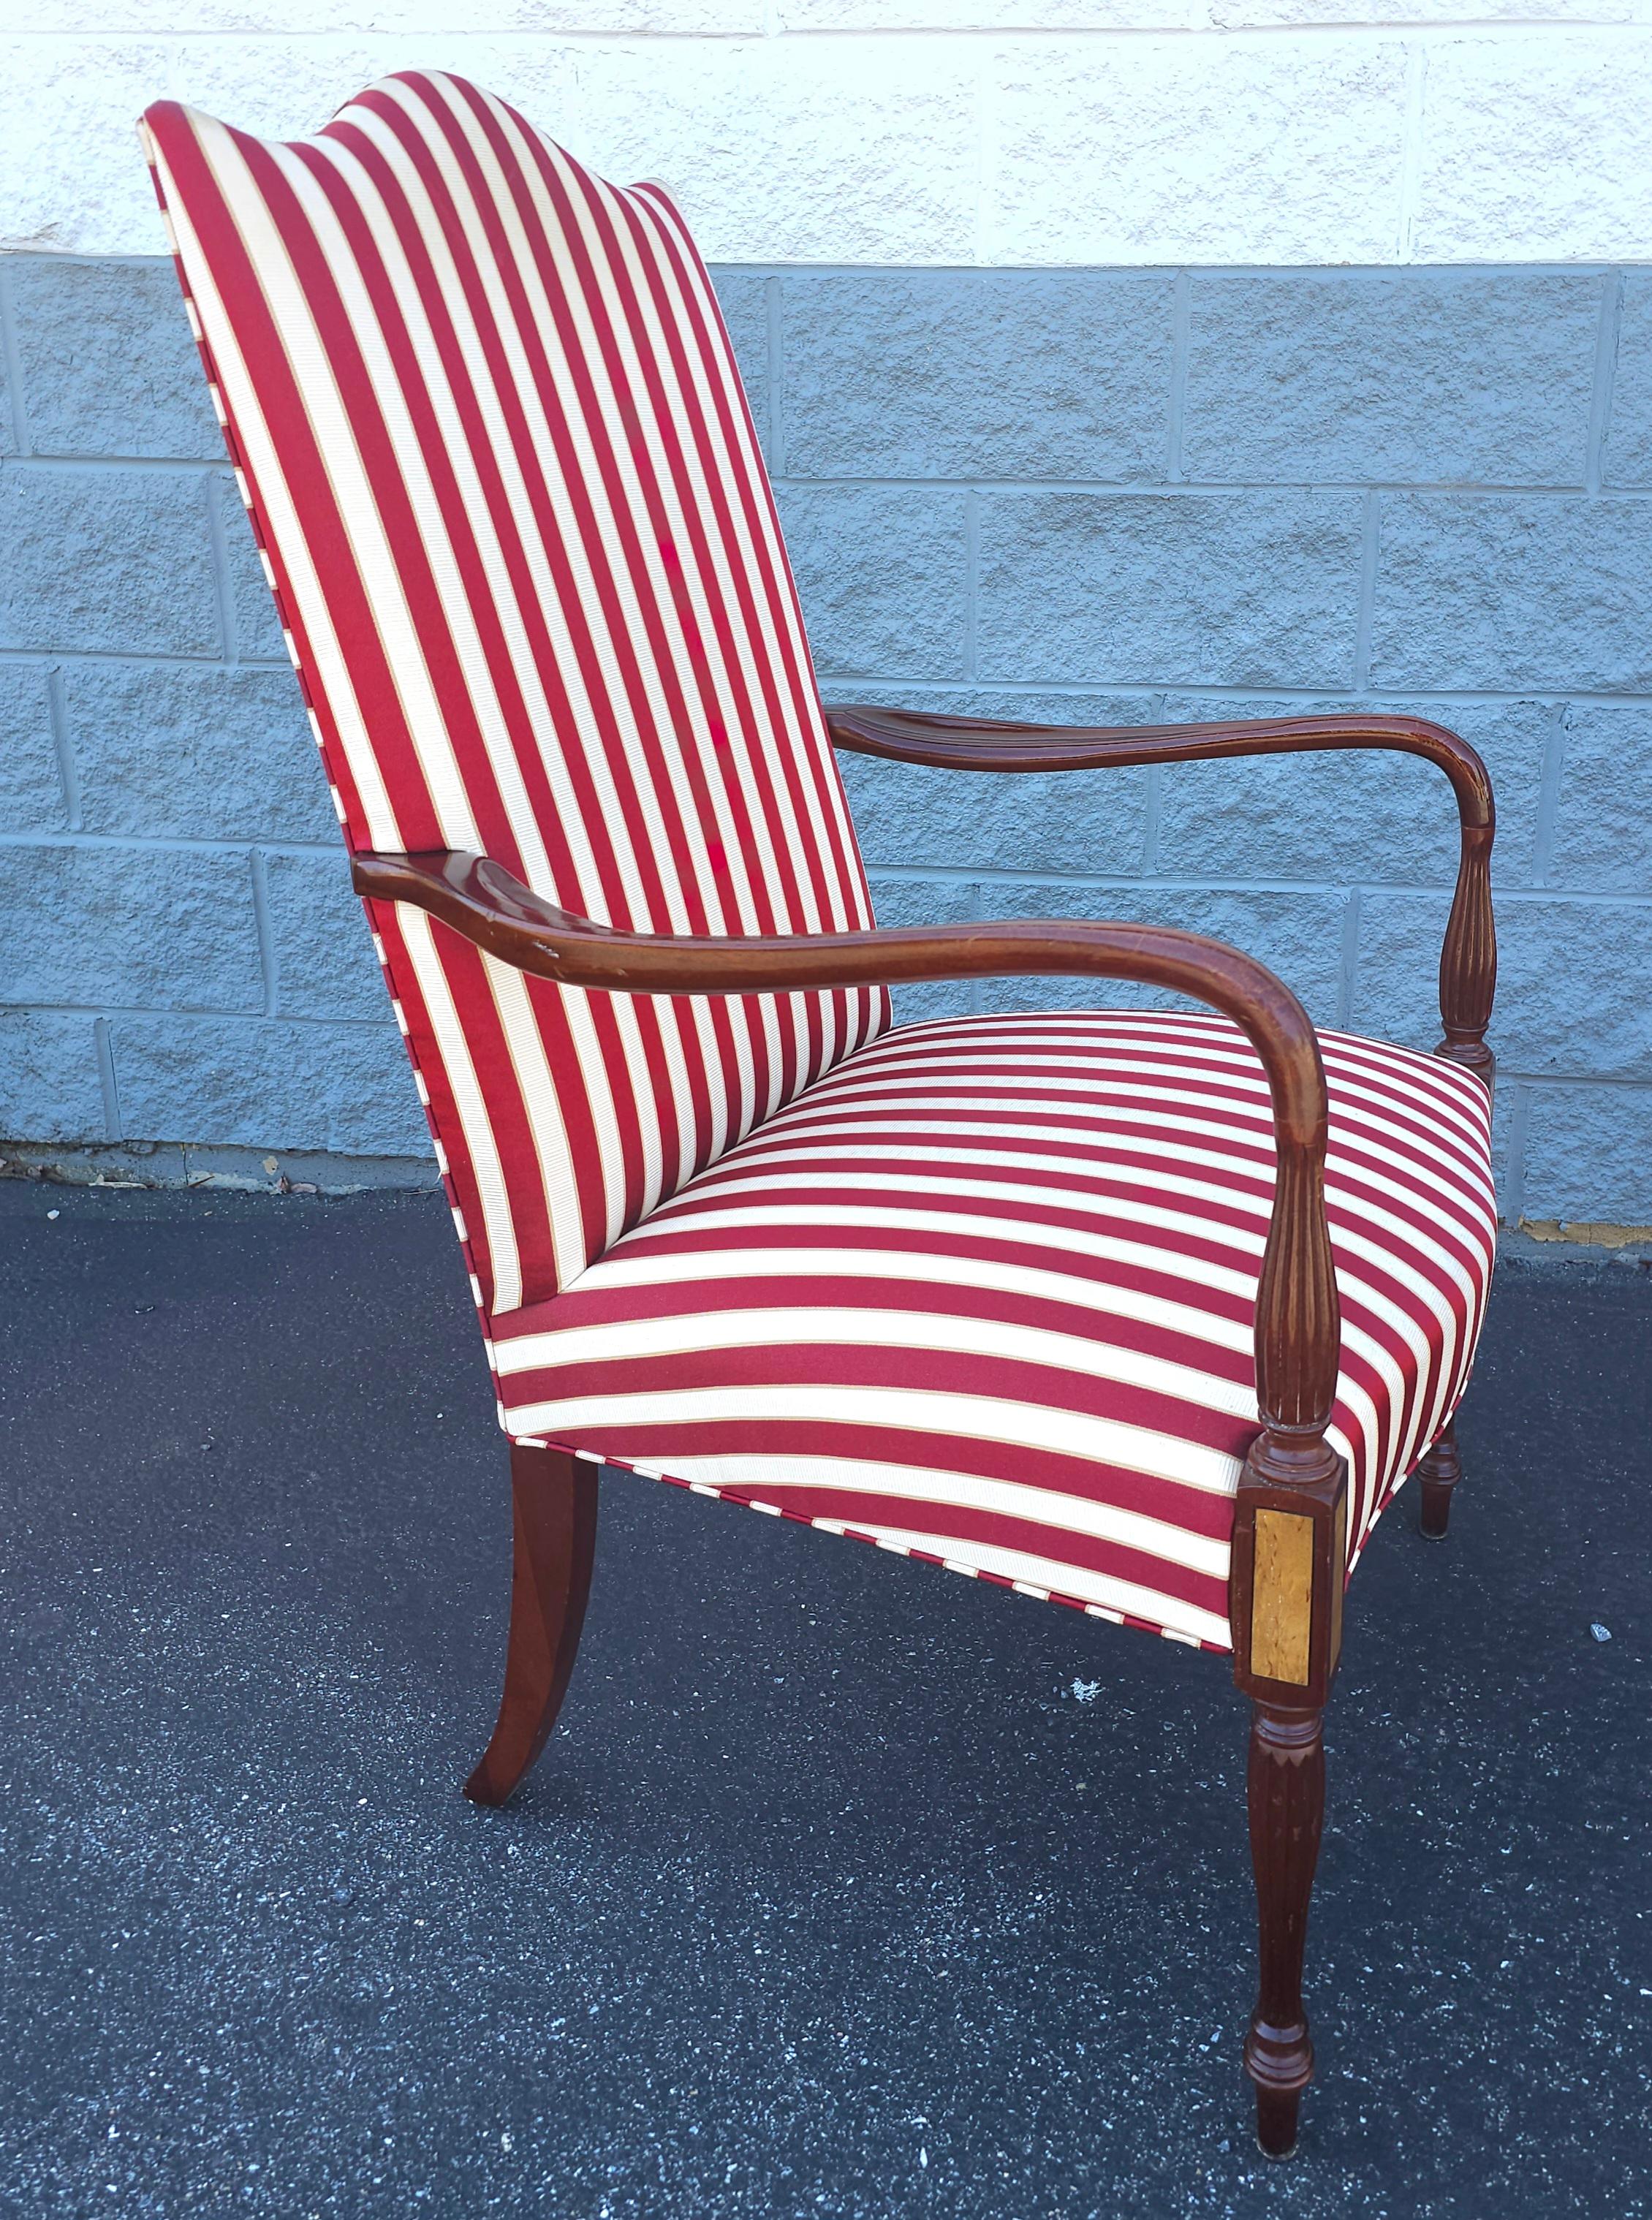 Upholstery Hickory Chair Martha Washington Mahogany Upholstered Open Arm Chairs, Pair For Sale